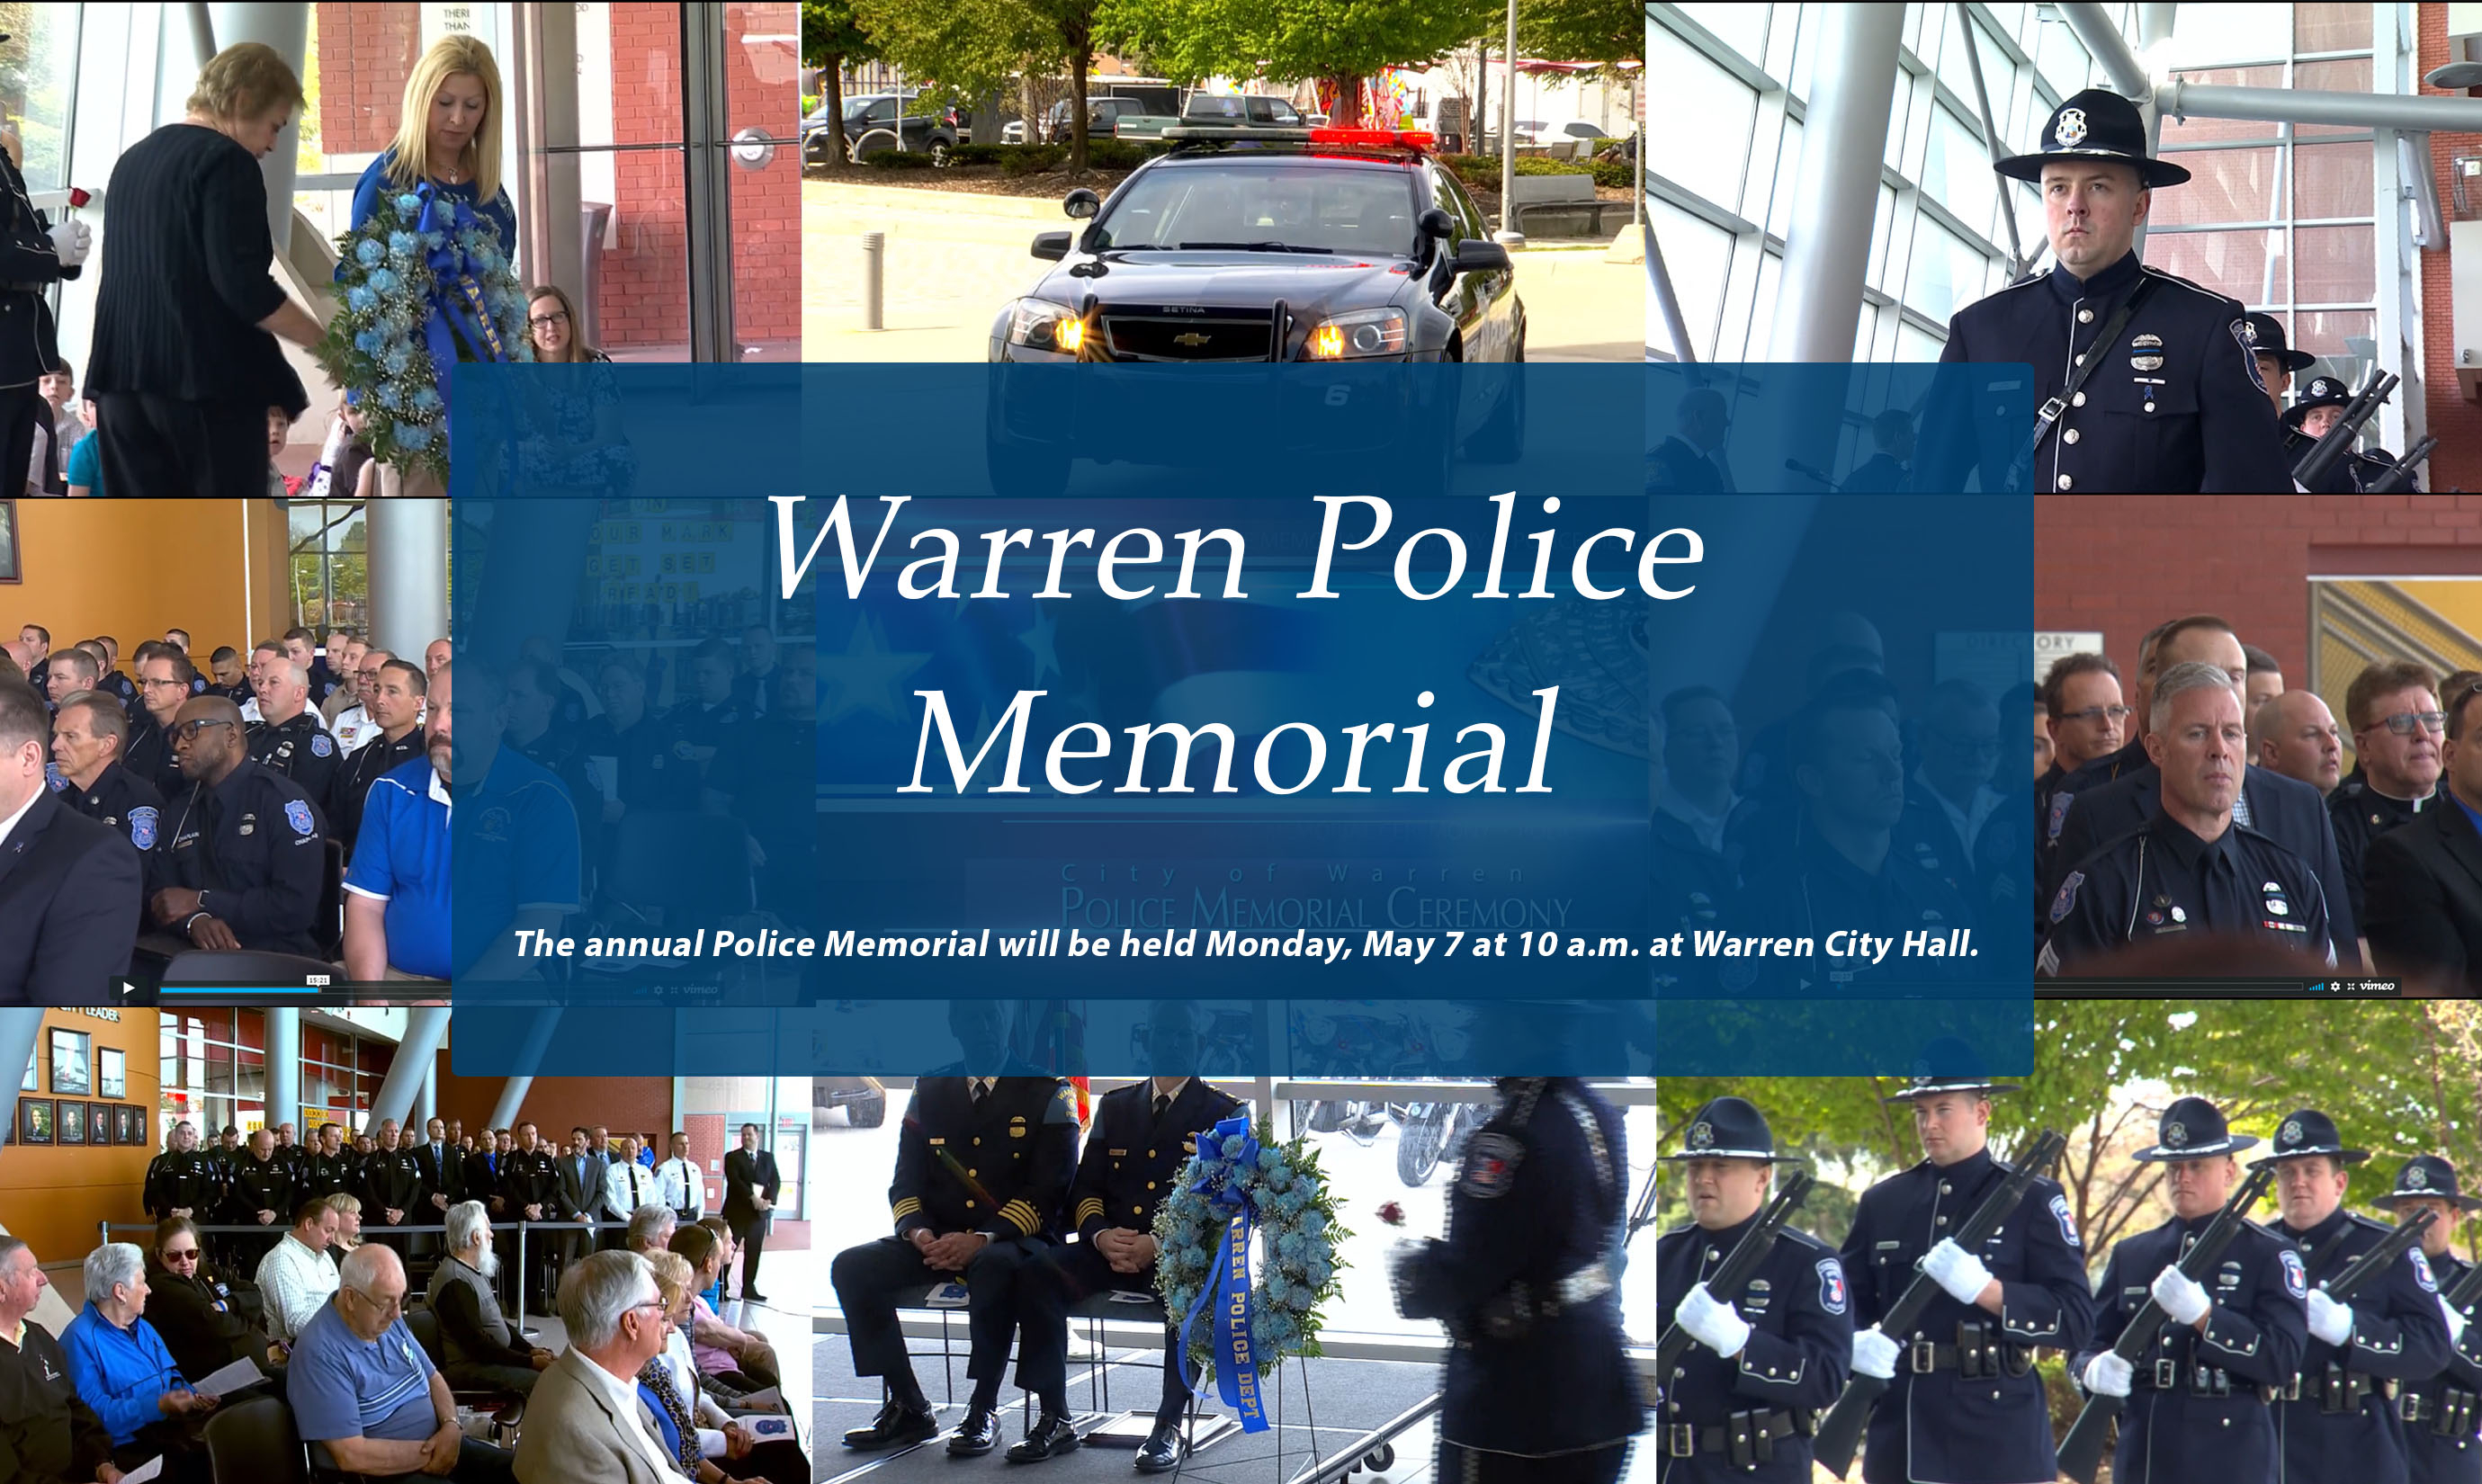 City of Warren to hold a Police Memorial